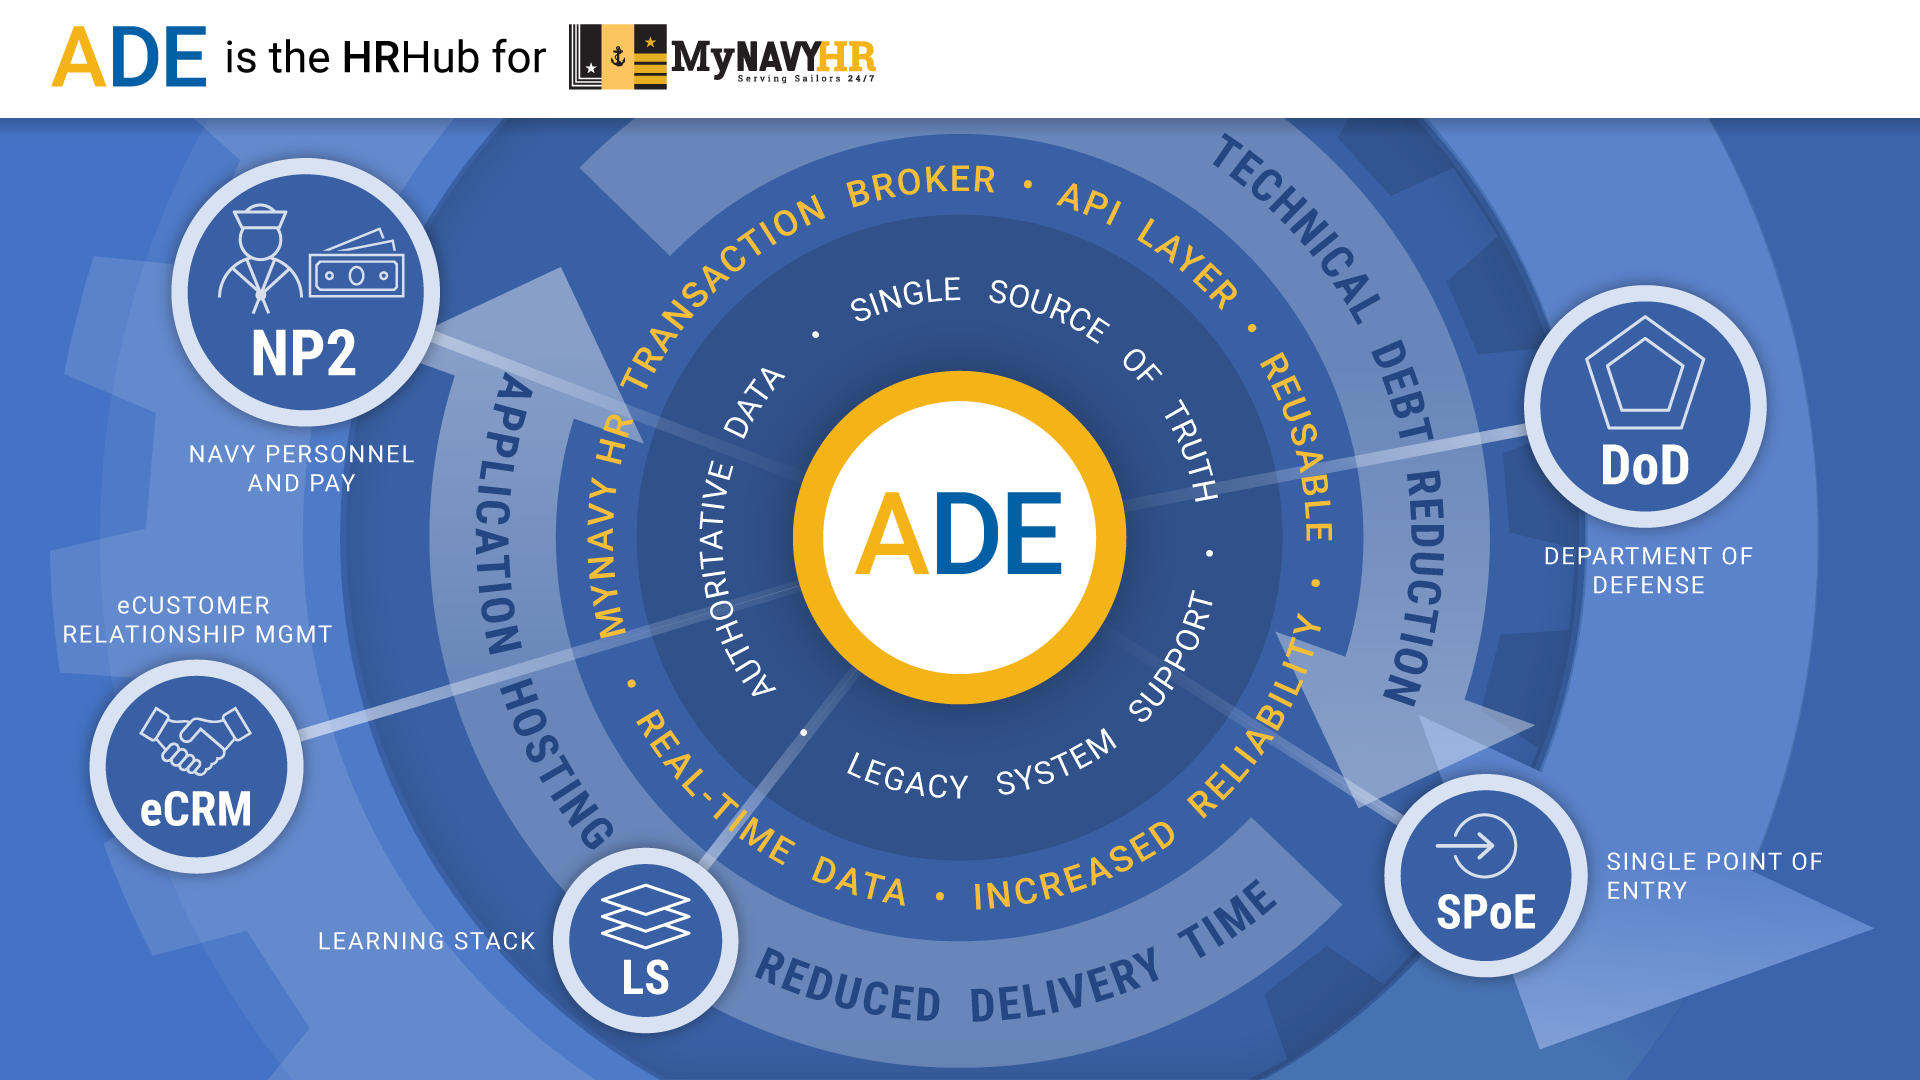 infographic depicting the many assets which establish the Authoritative Data Environment as the Data Exchange Broker for the US NAVY HR organization